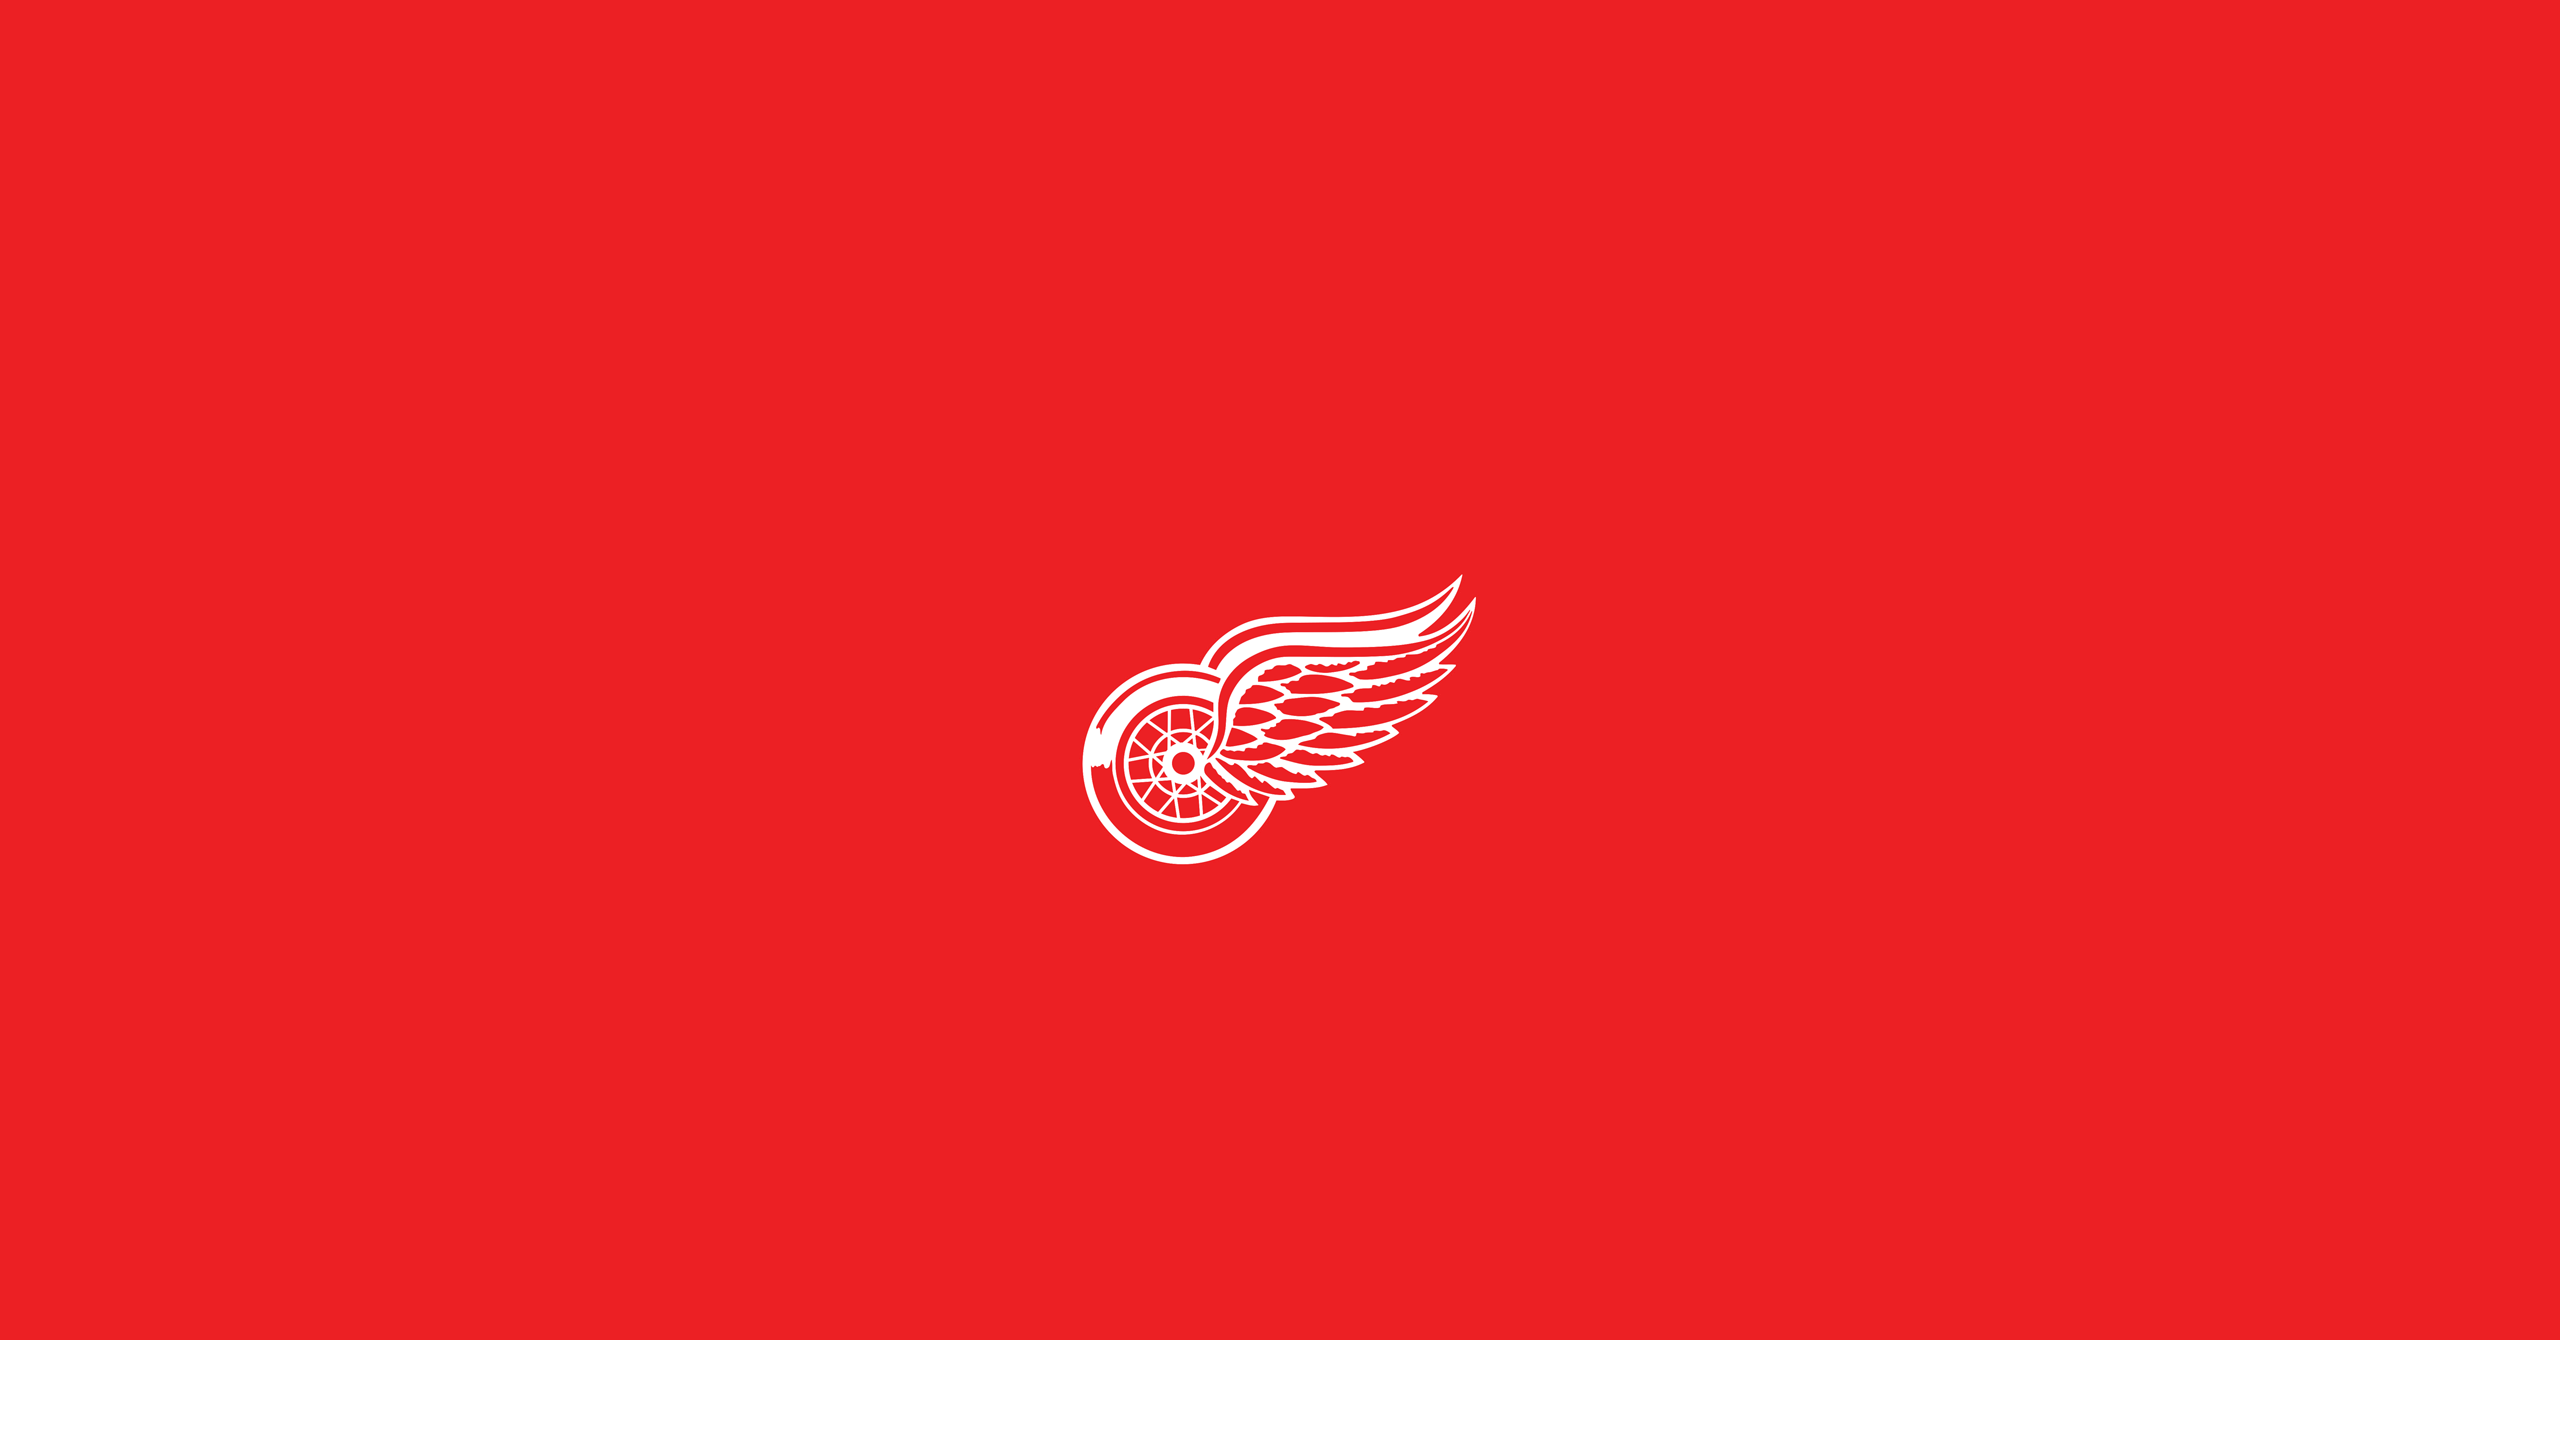 Detroit Red Wings - NHL - Square Bettor